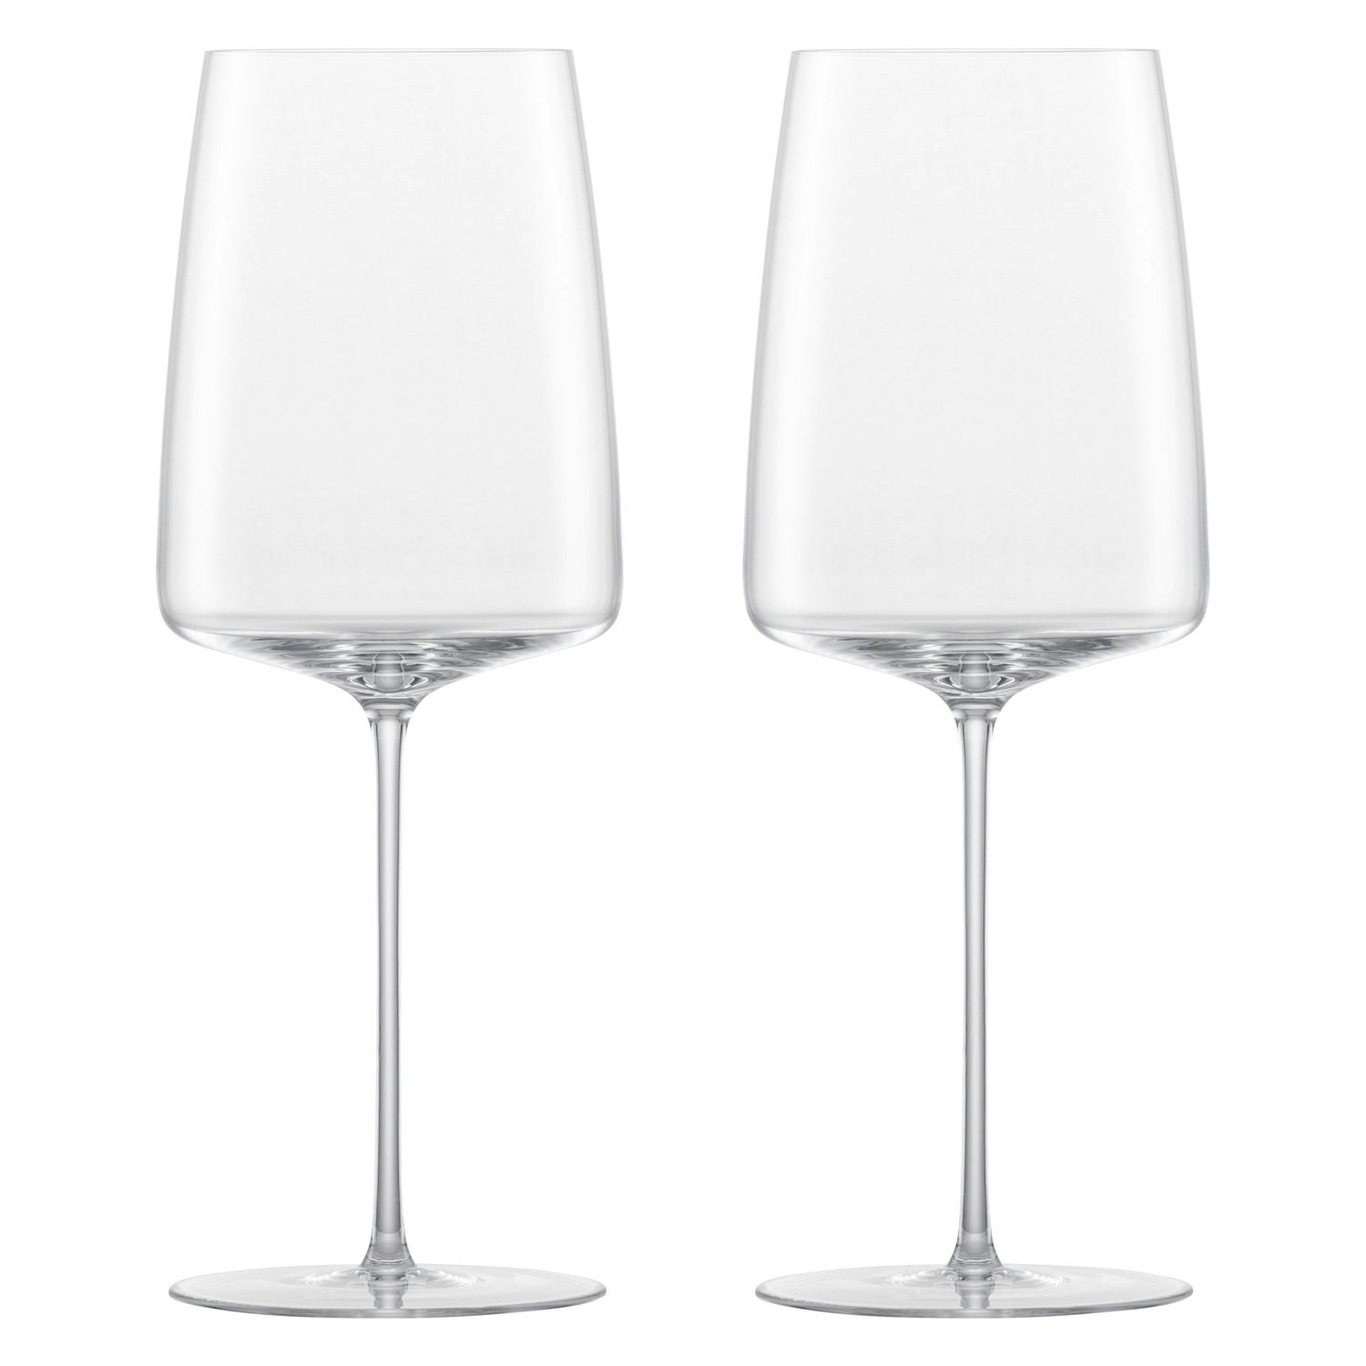 https://royaldesign.com/image/2/zwiesel-simplify-flavoursome-spicy-wine-glass-69-cl-2-pack-0?w=800&quality=80